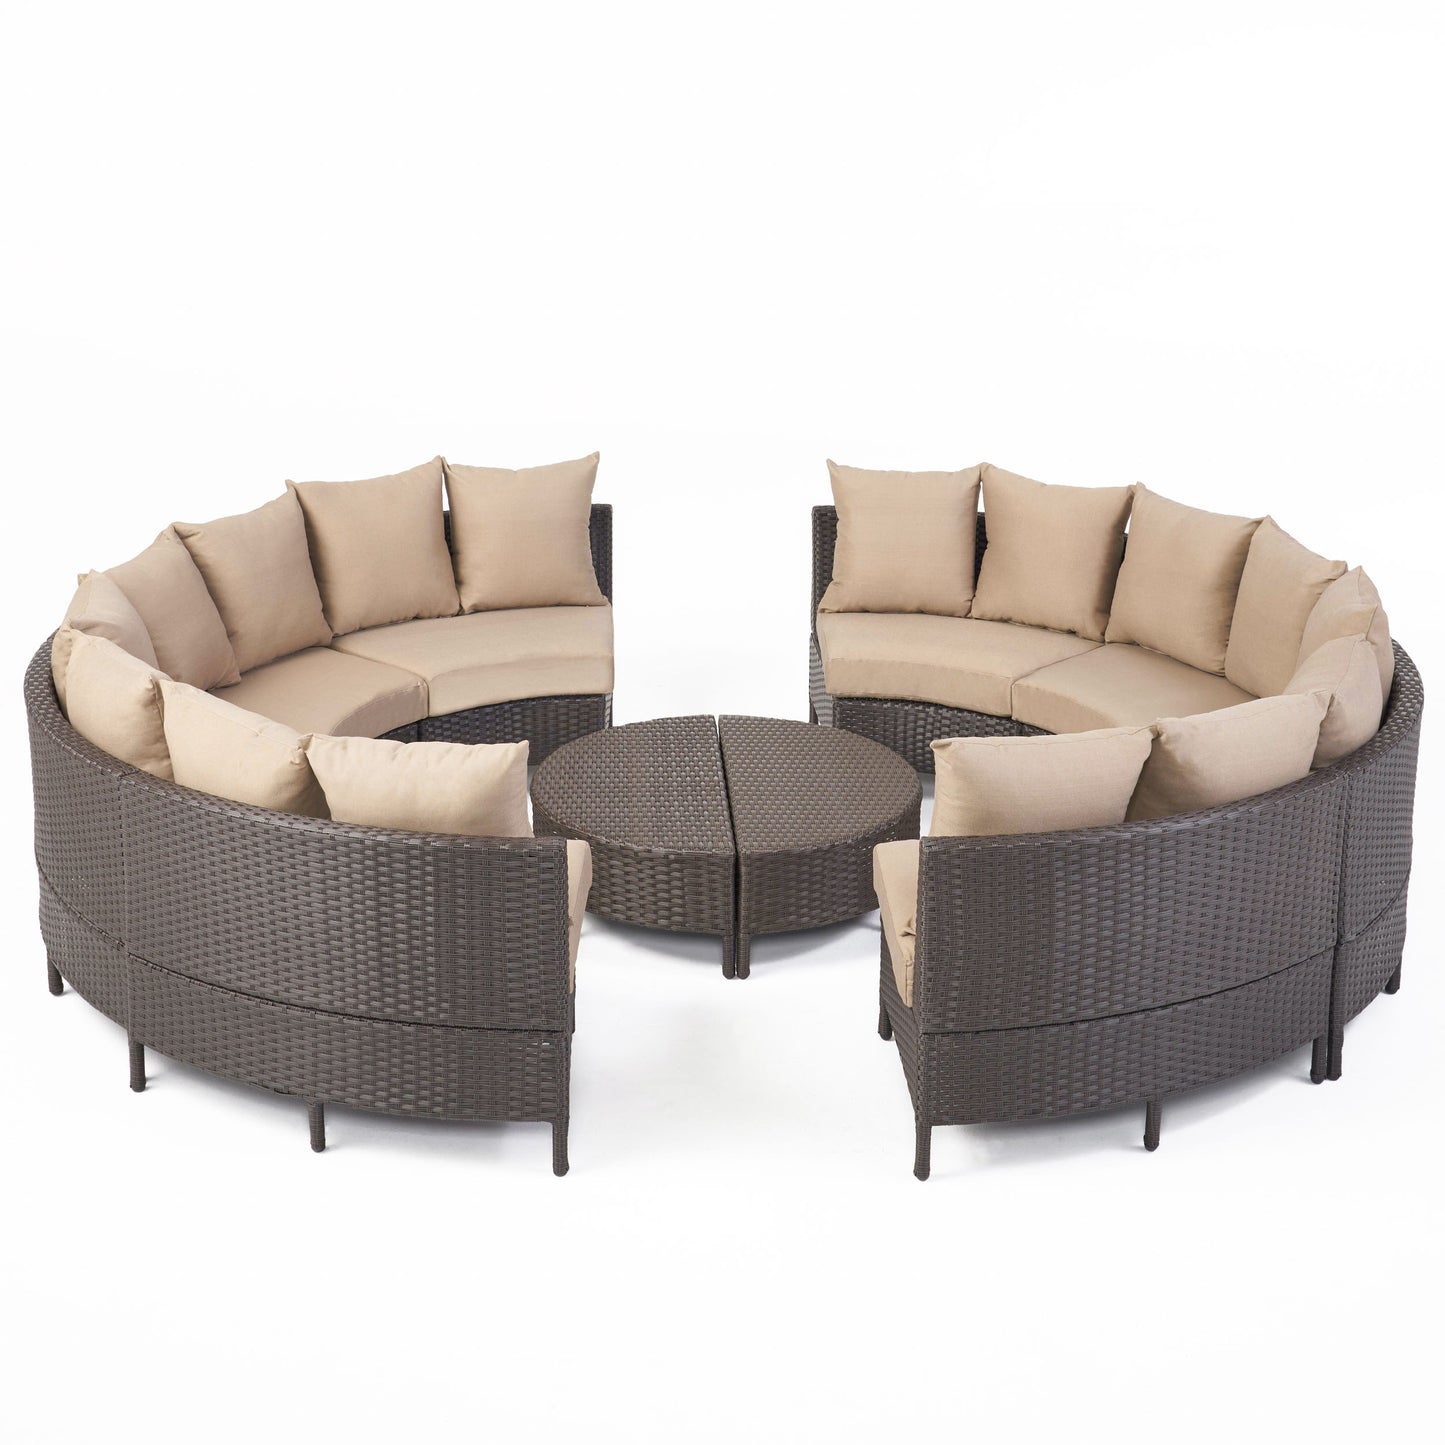 Falkland Outdoor 8 Seater Round Wicker Sectional Sofa Set with Coffee Tables